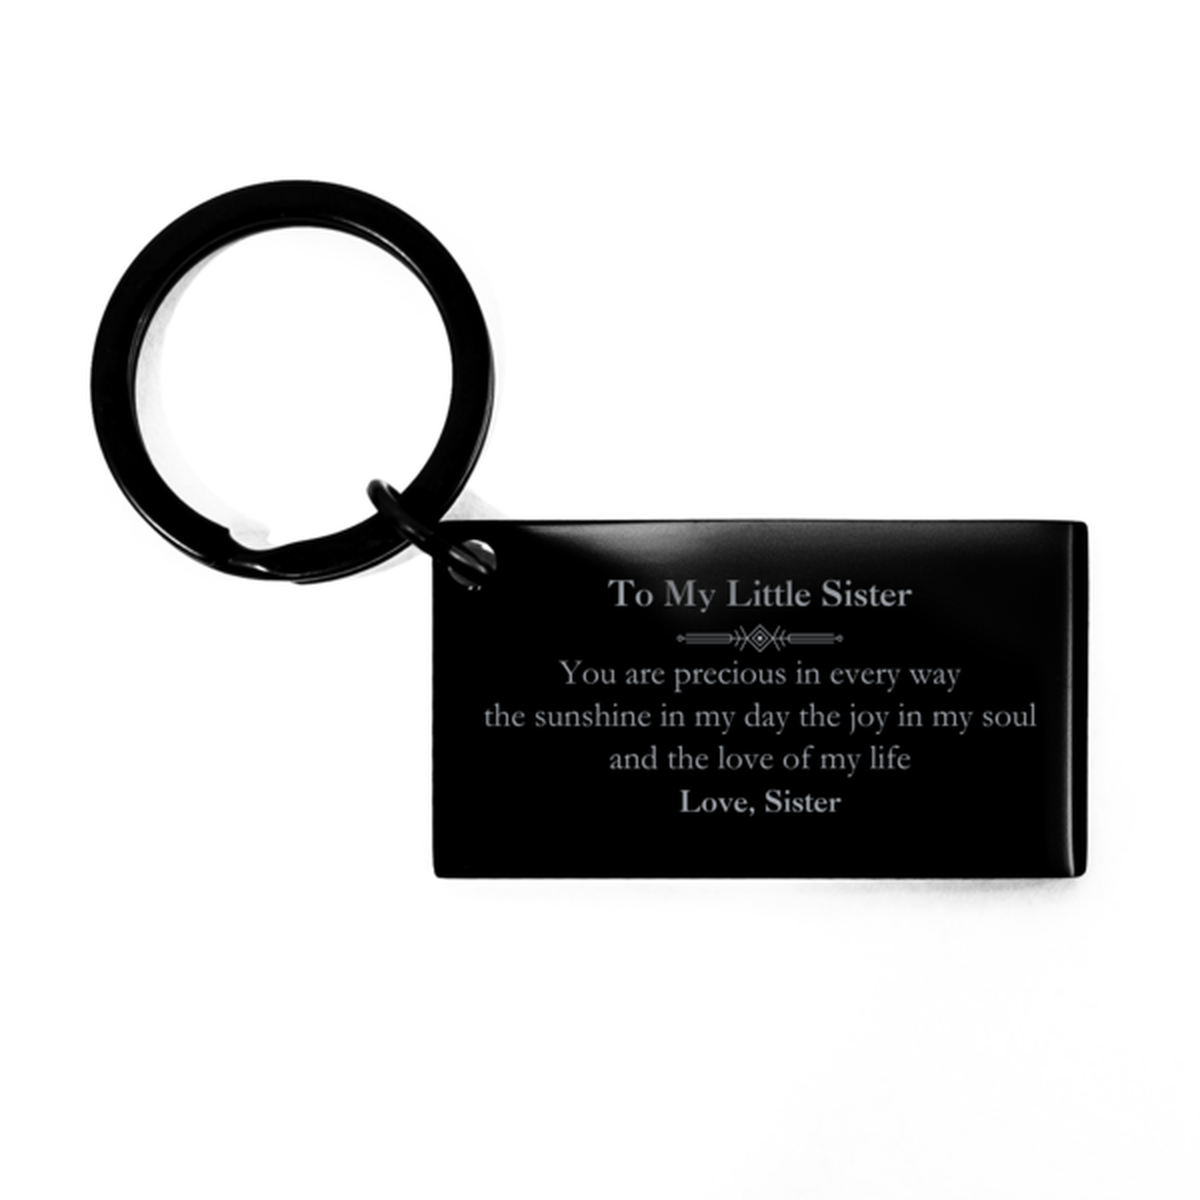 Graduation Gifts for Little Sister Keychain Present from Sister, Christmas Little Sister Birthday Gifts Little Sister You are precious in every way the sunshine in my day. Love, Sister